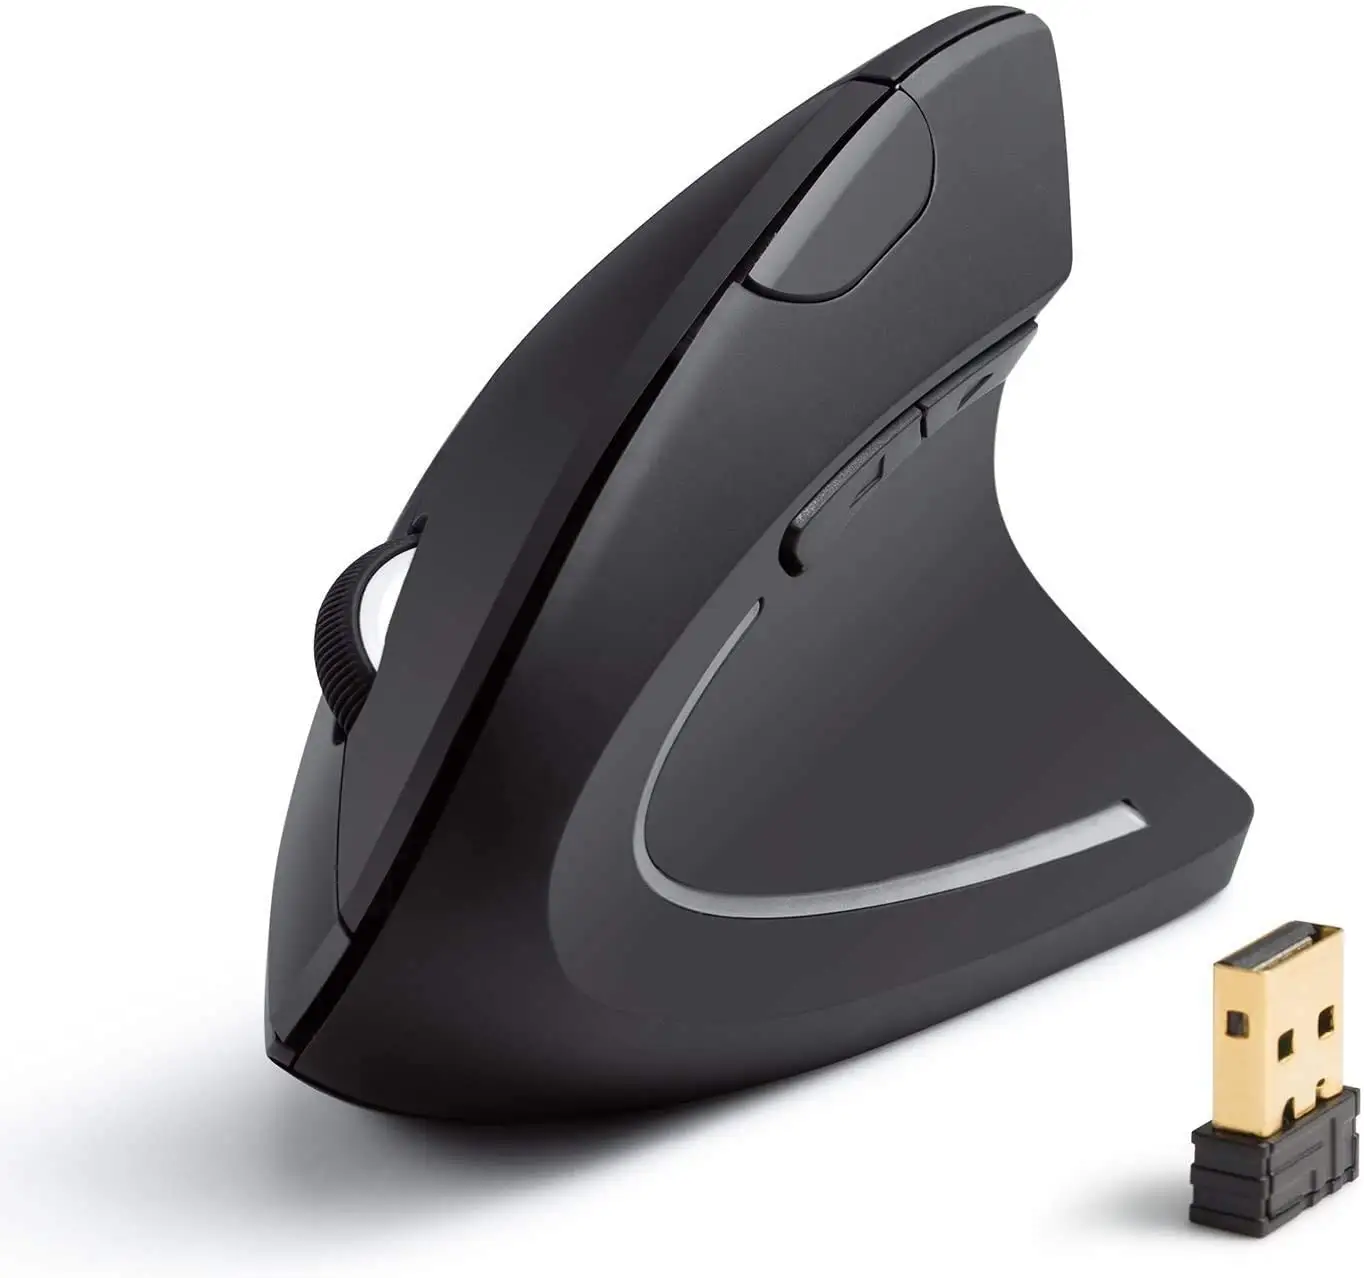 Wireless Ergonomic Mouse Vertical Mouse Computer Laptop 2.4G Wireless Ergonomic Wireless Mouse